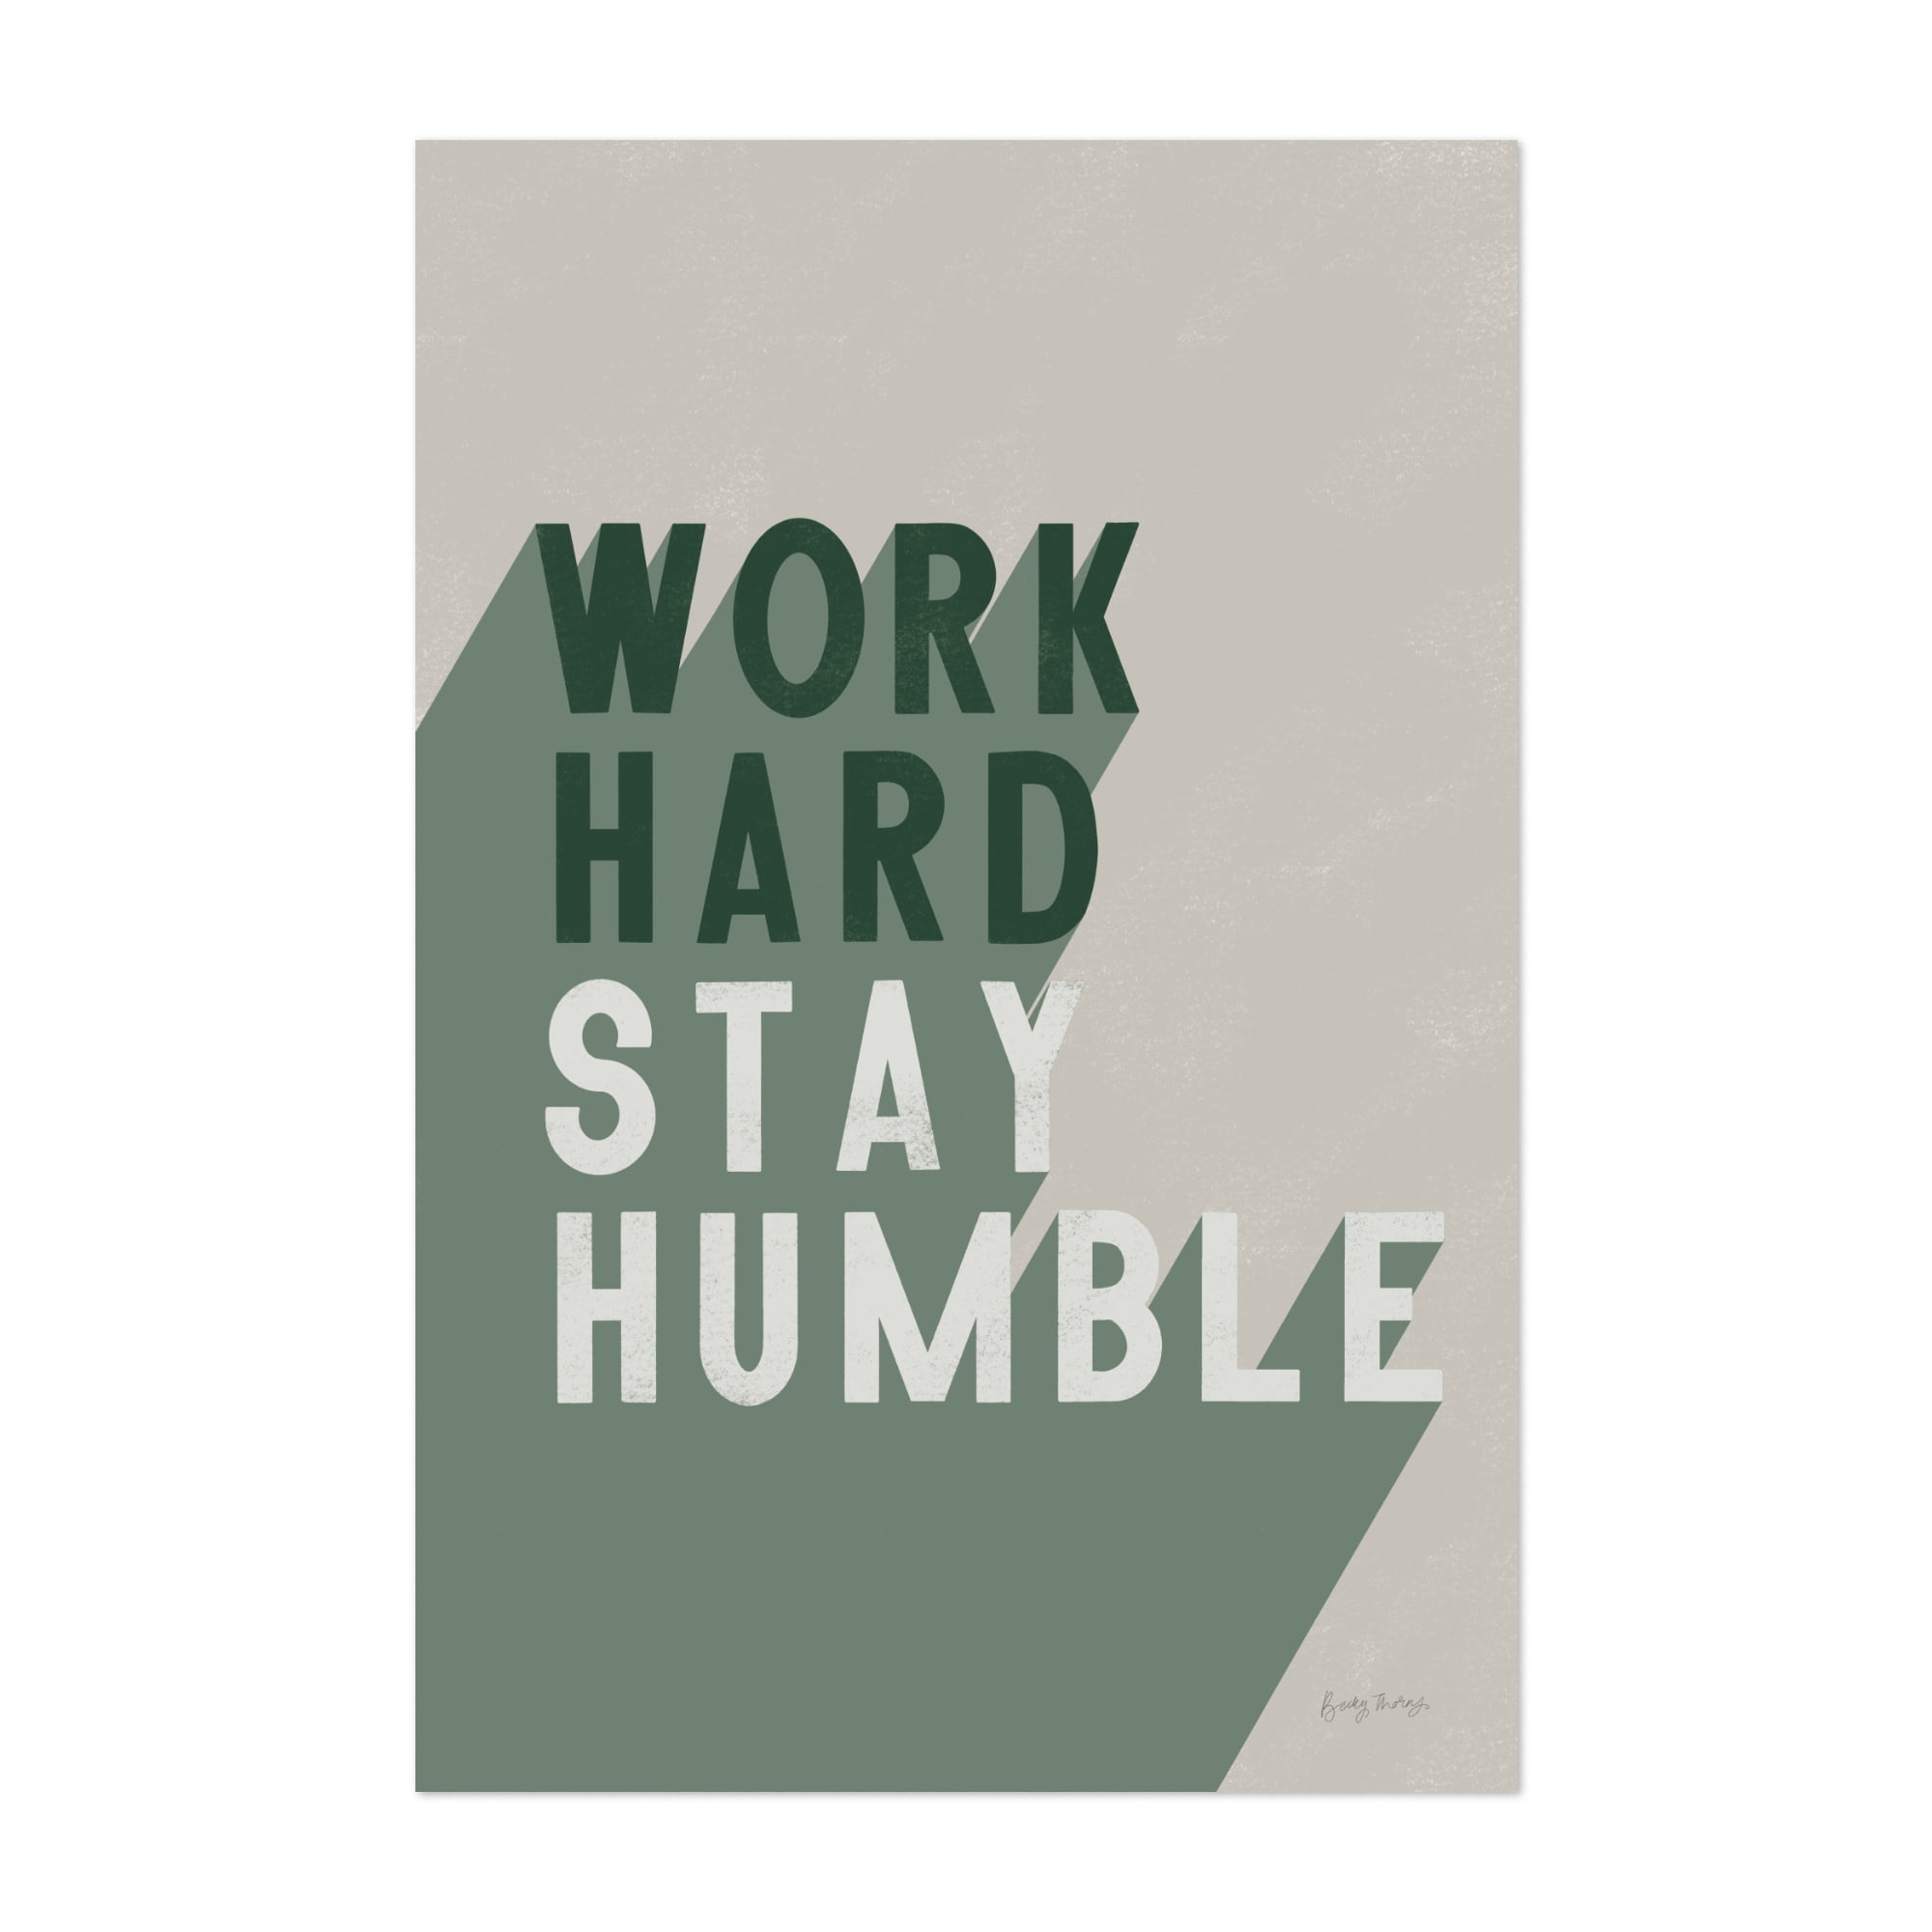 Work Hard Stay Humble 1 Typography Home Decor Wall Art Poster Print UNFRAMED 